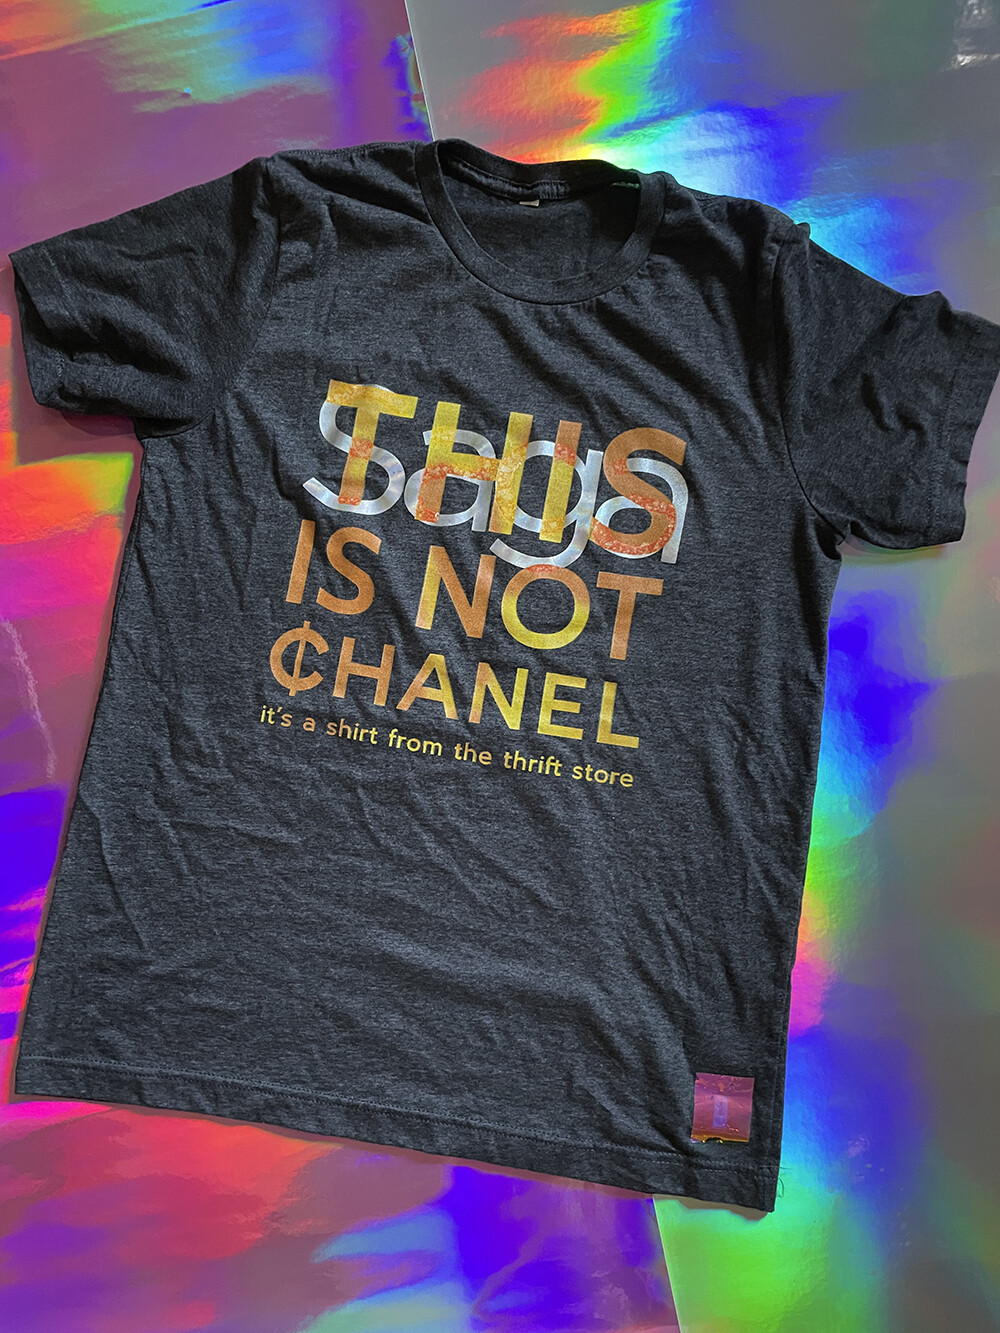 This Is Not ¢hanel - NFC clothing - Dark Grey Shirt